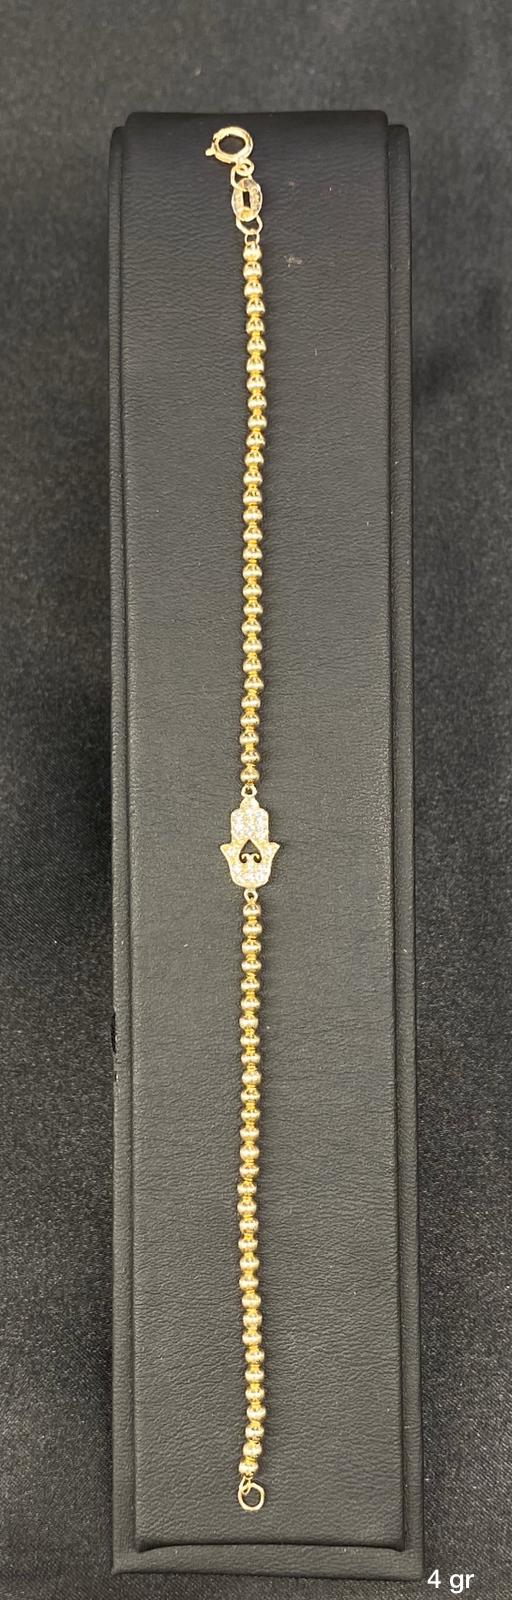 10k Solid Gold Hand Of Fatima Bracelet With Ball Chain Link